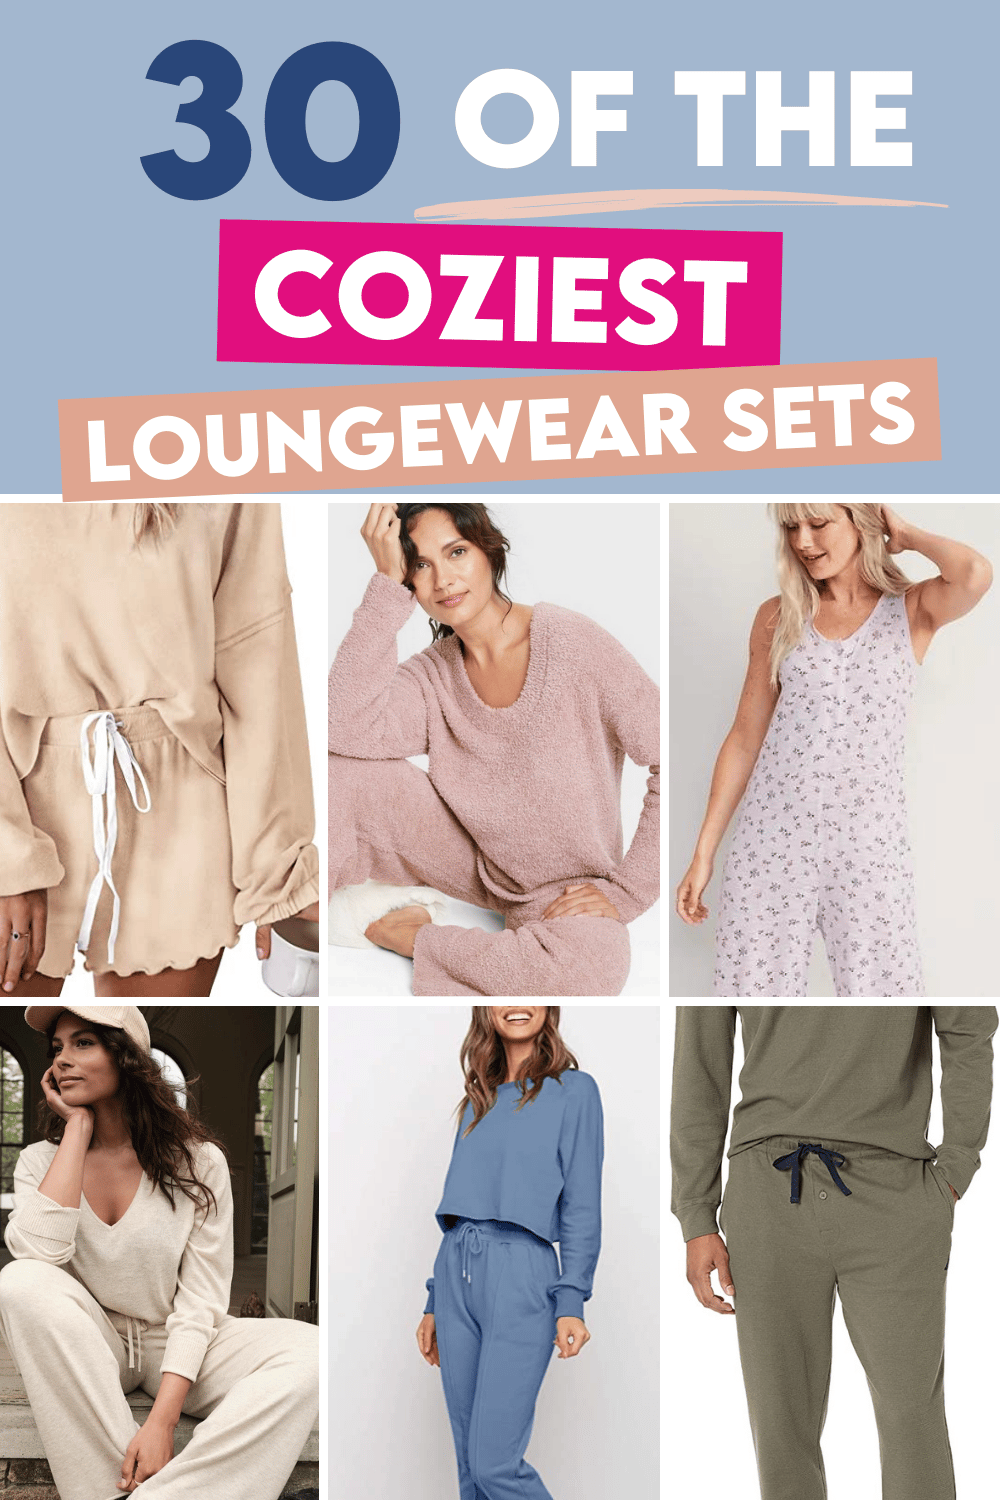 Check out this list of 30 of the best loungewear sets! | The Dating Divas